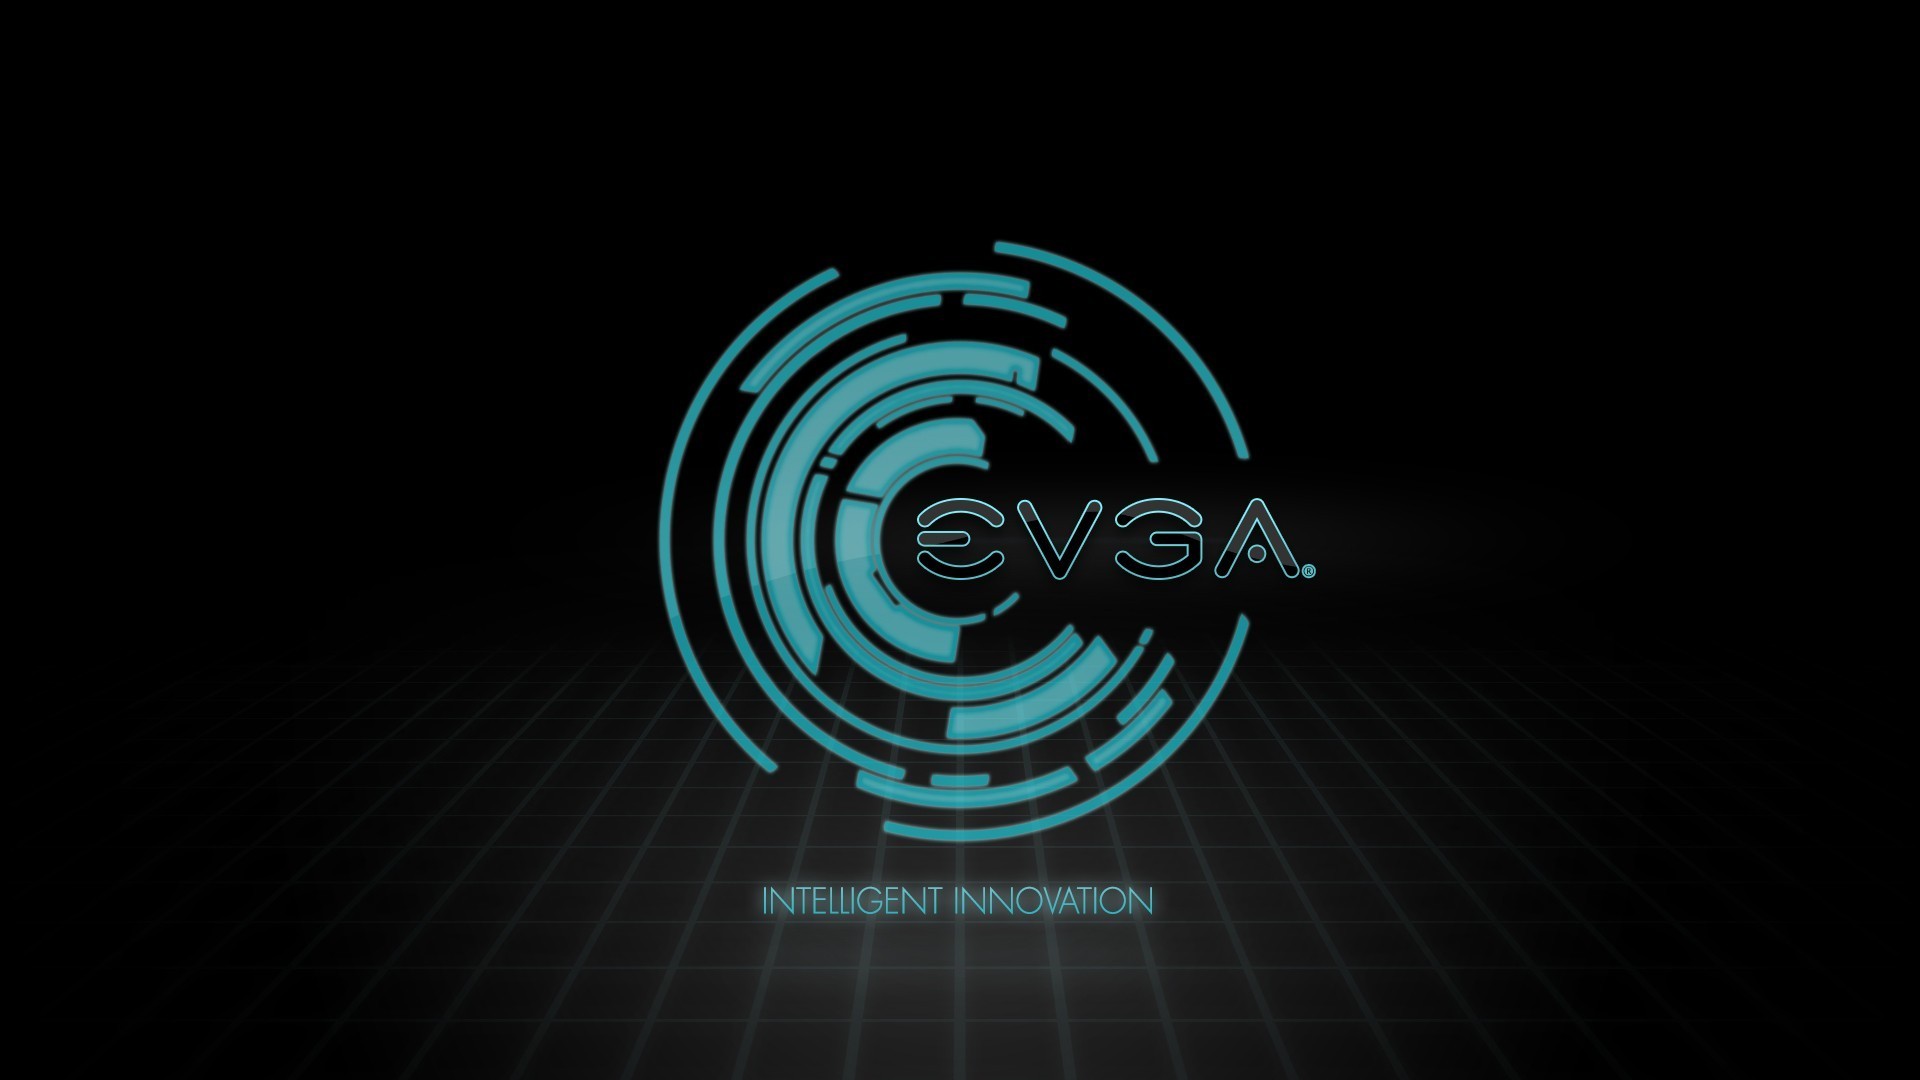 1920x1080 Search Results for “evga wallpaper backgrounds” – Adorable Wallpapers